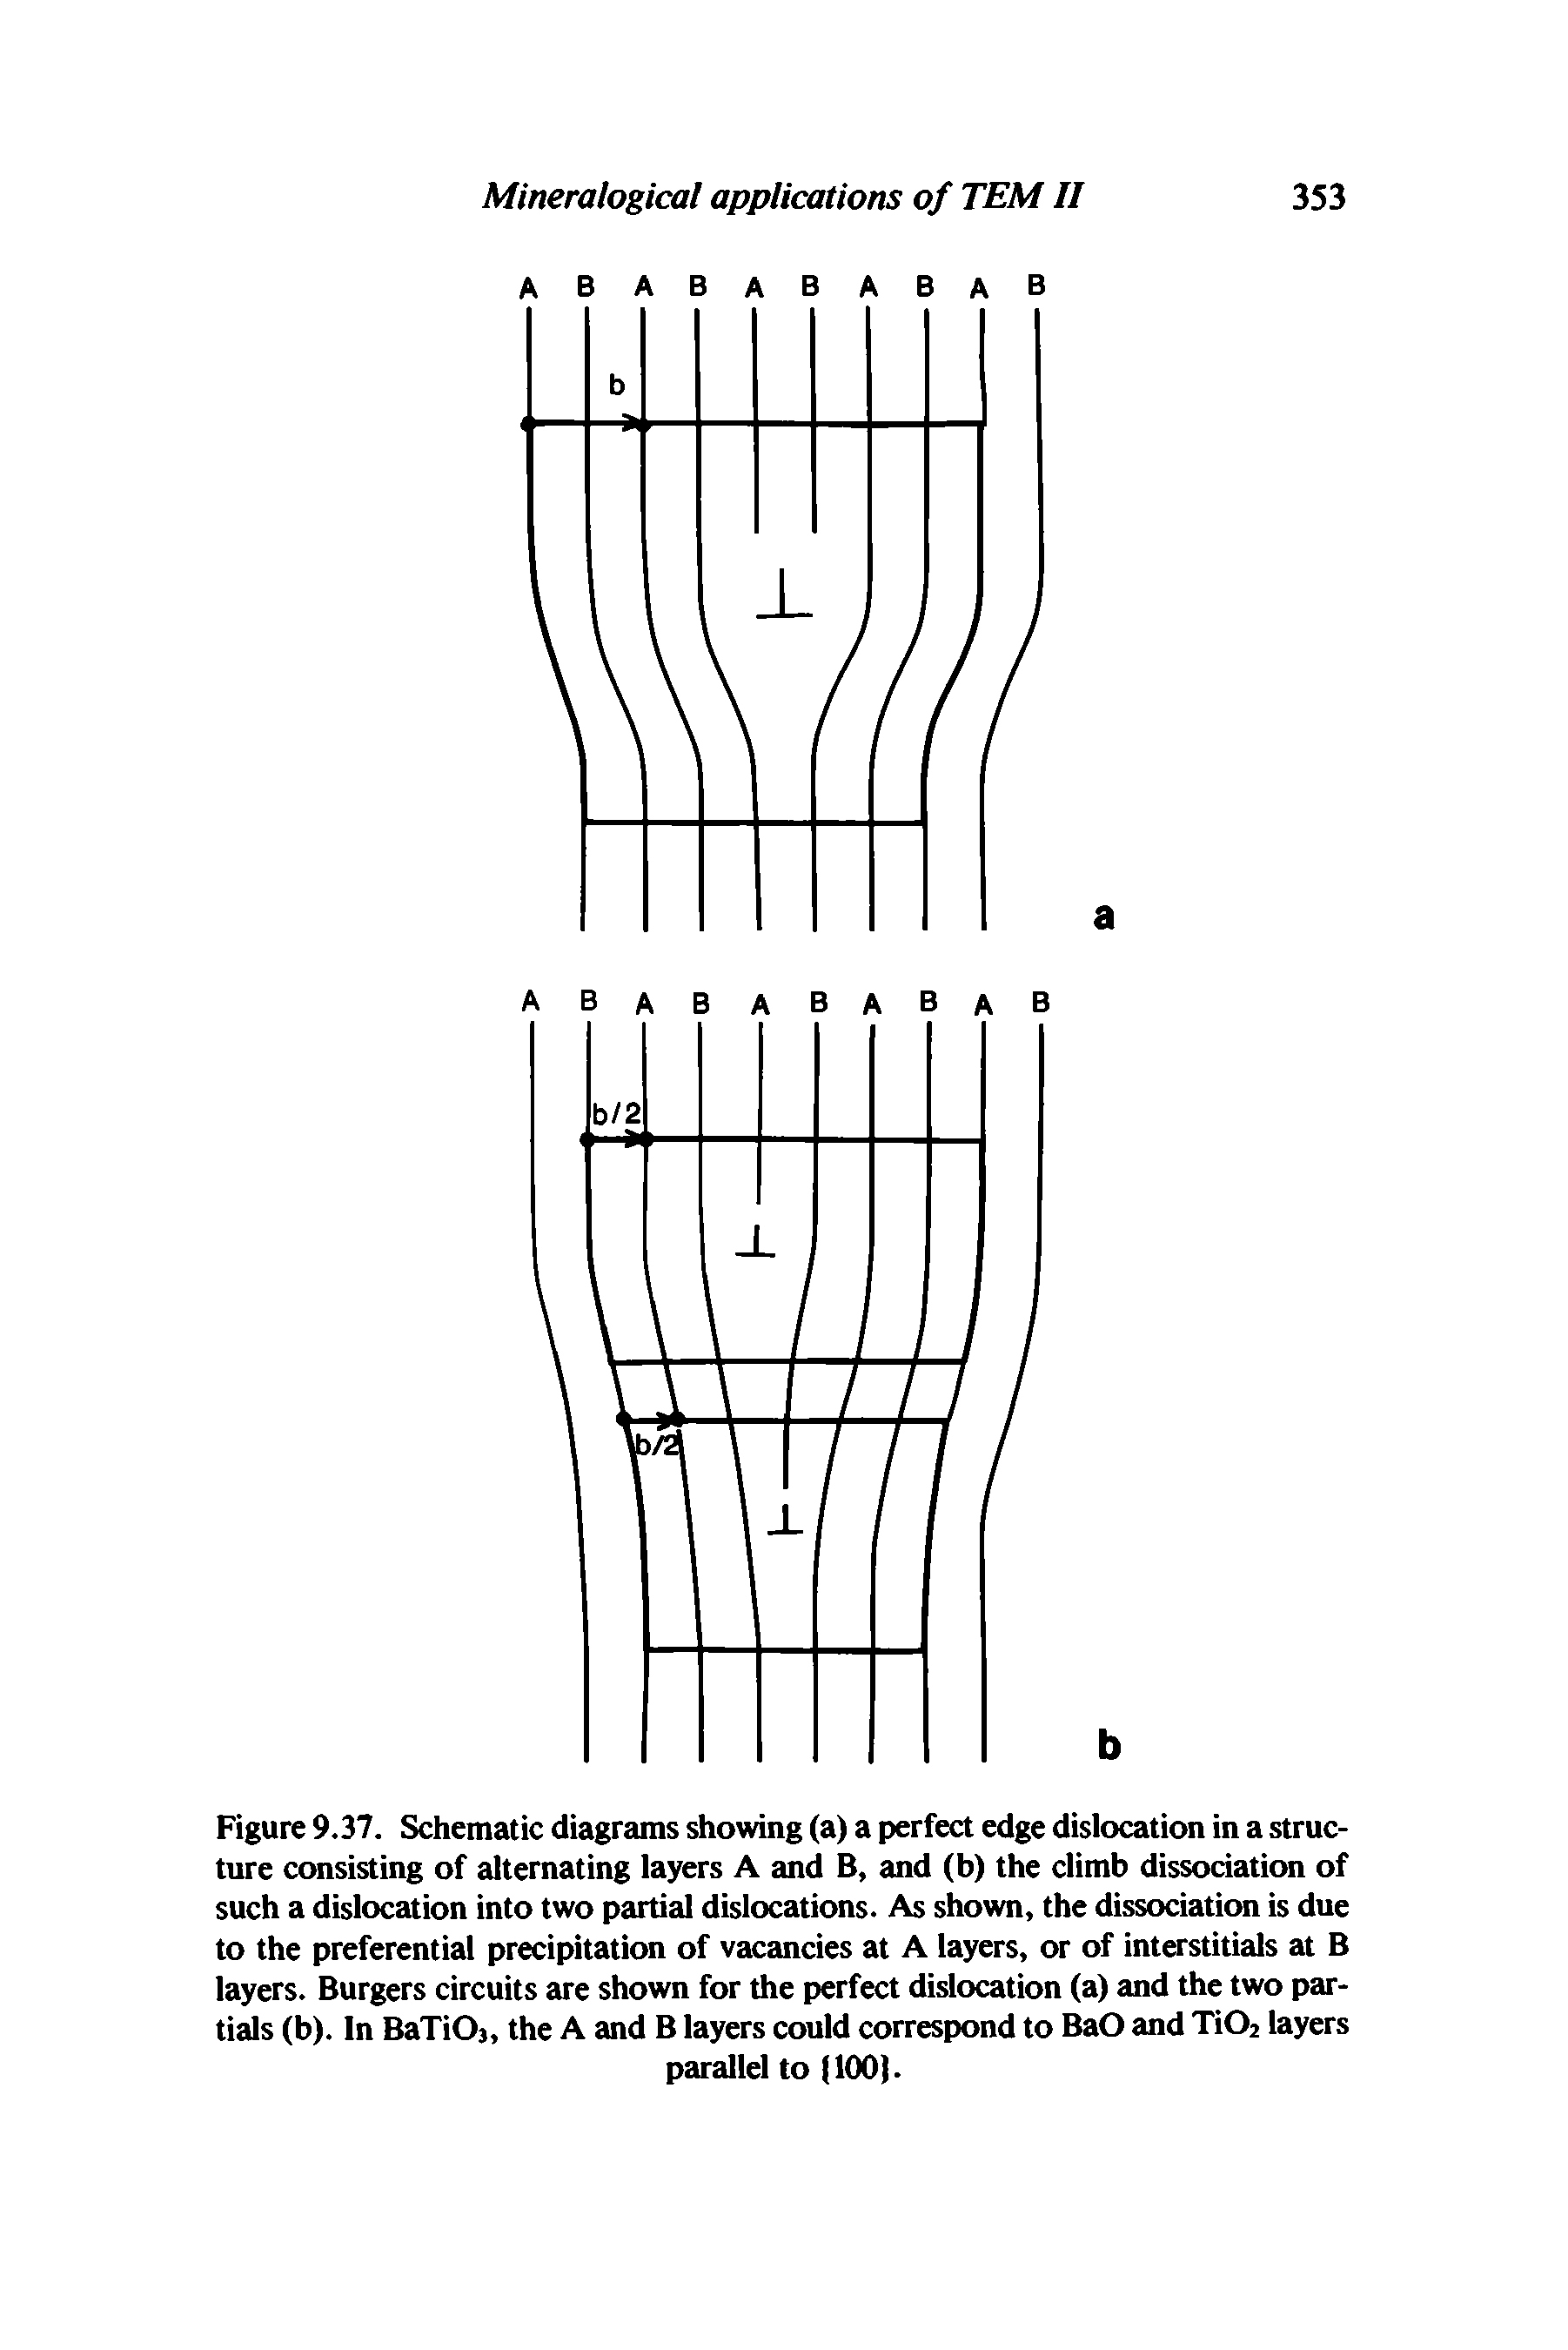 Figure 9.37. Schematic diagrams showing (a) a perfect edge dislocation in a structure consisting of alternating layers A and B, and (b) the climb dissociation of such a dislocation into two partial dislocations. As shown, the dissociation is due to the preferential precipitation of vacancies at A layers, or of interstitials at B layers. Burgers circuits are shown for the perfect dislocation (a) and the two par-tials (b). In BaTiOs, the A and B layers could correspond to BaO and Ti02 layers...